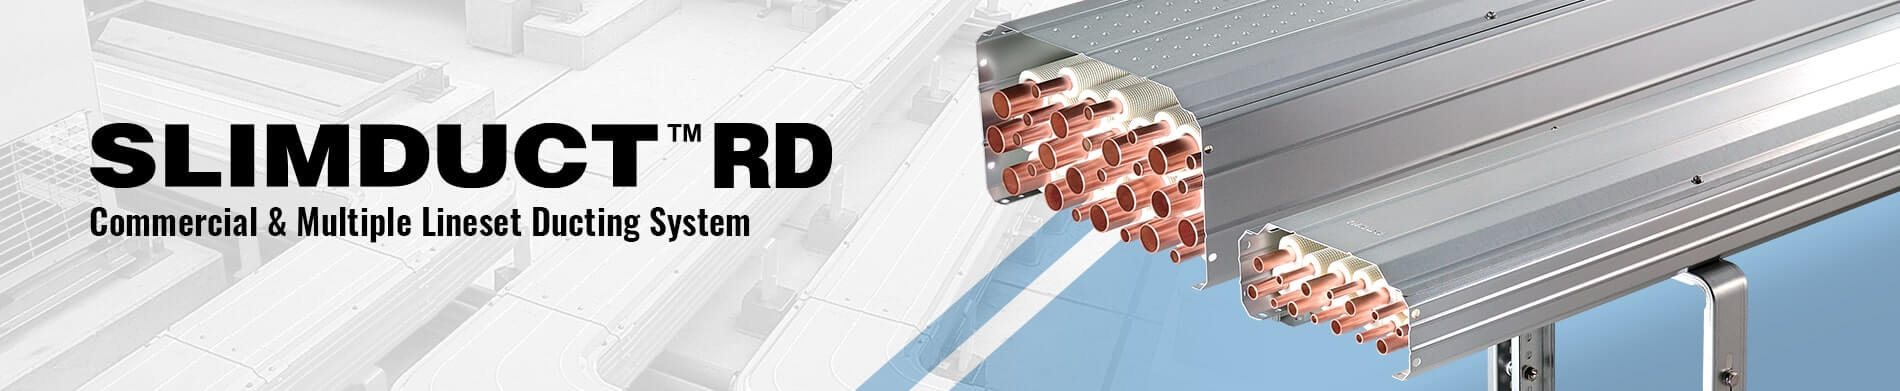 SLIMDUCT RD | Commercial & Multiple VRF System Cover Ducting System